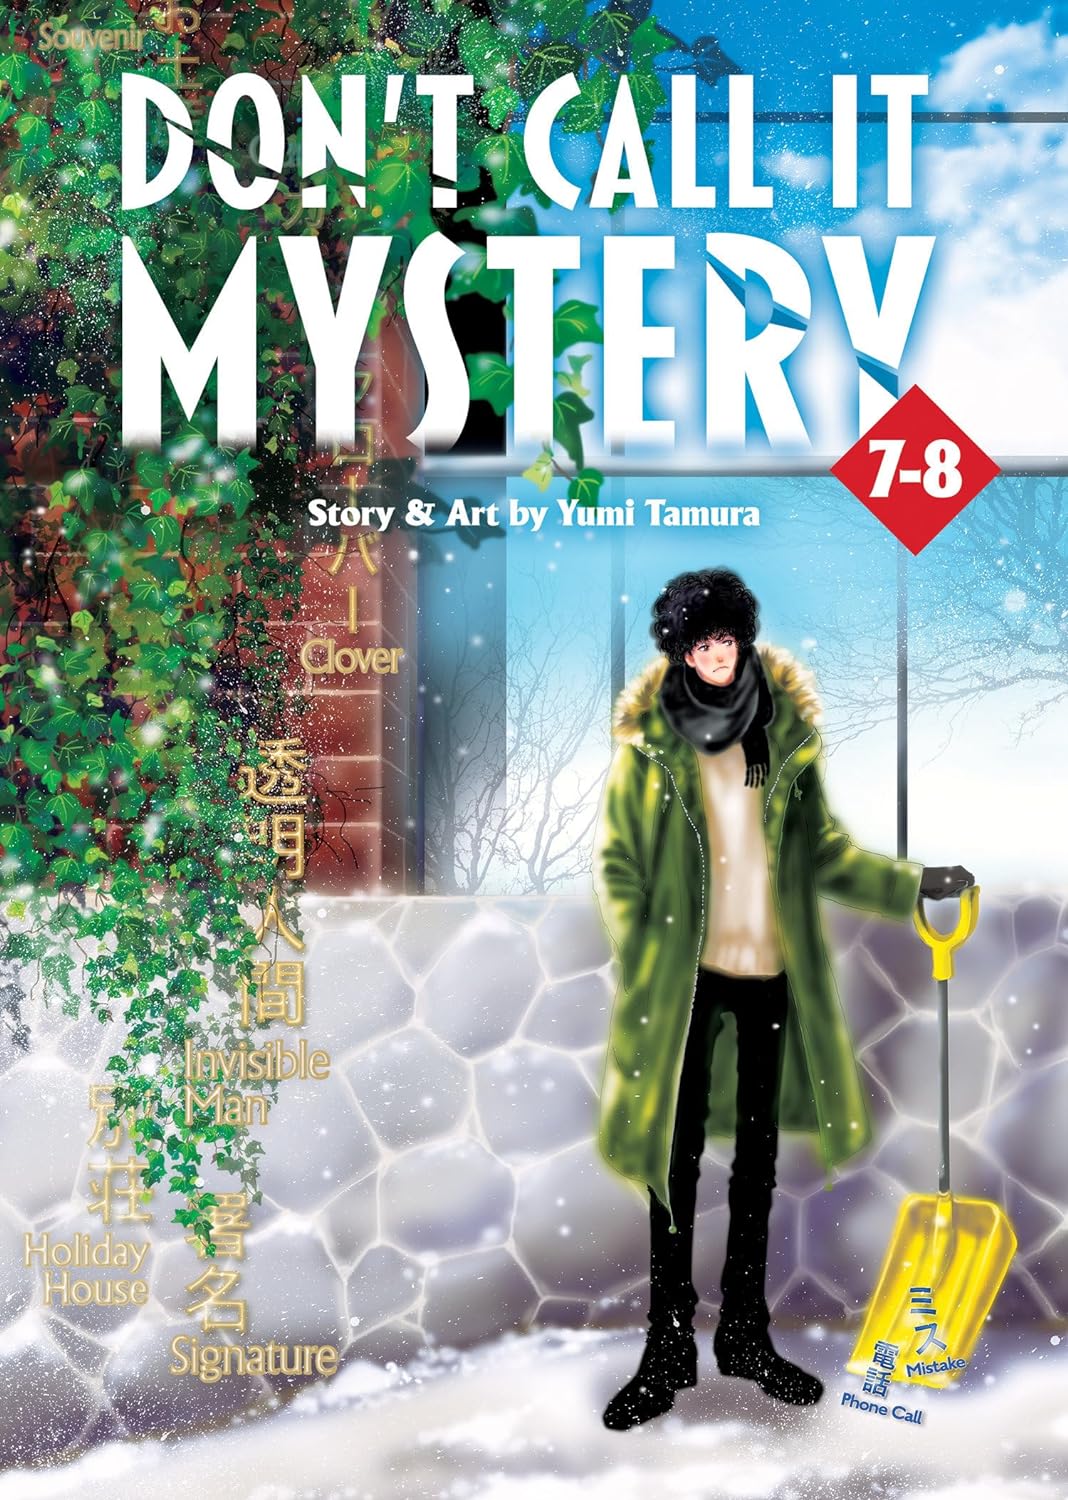 Don't Call It Mystery (Omnibus) Vol. 07-08